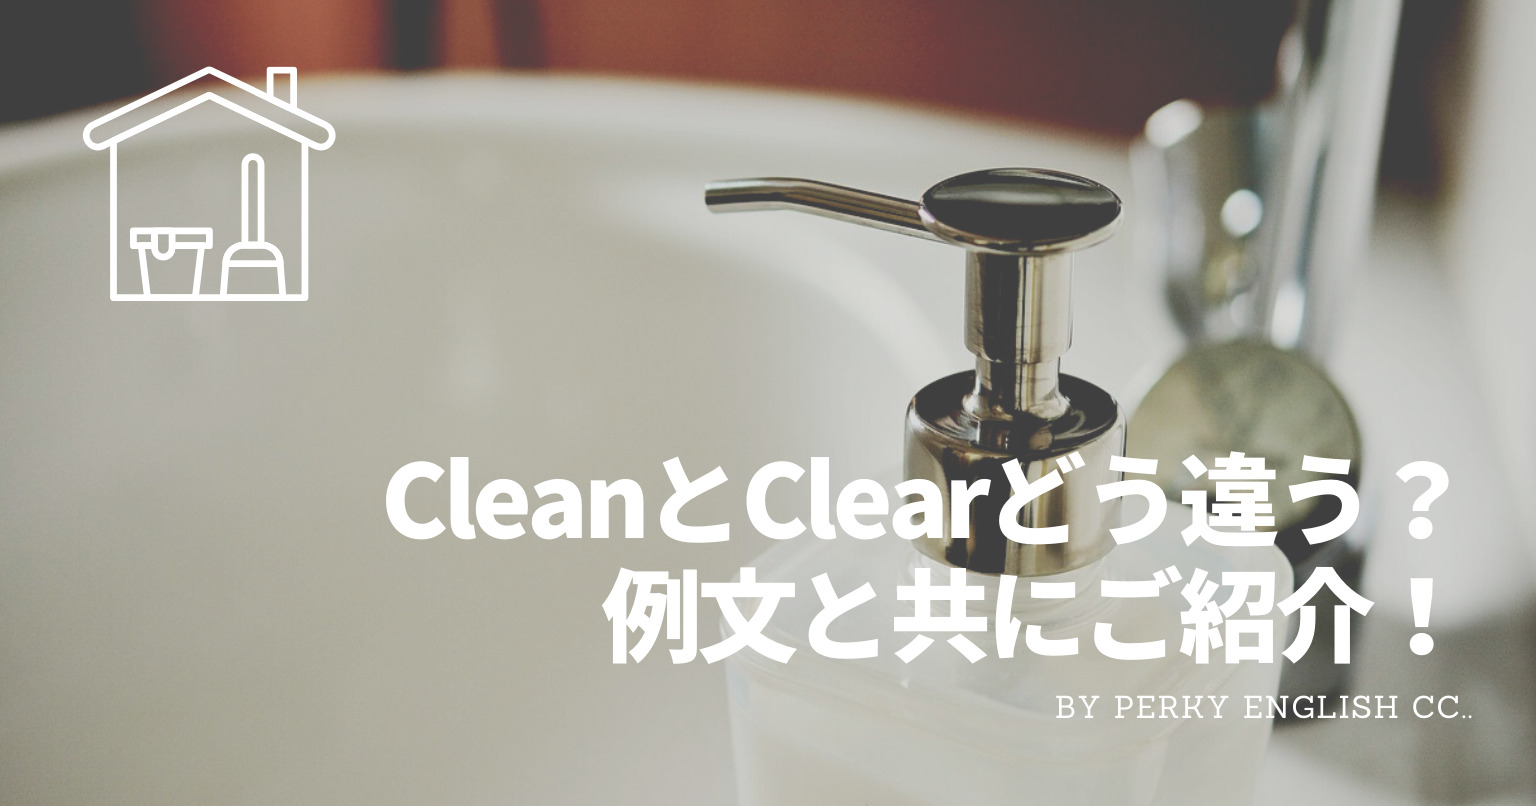 「clean」と「clear」はどう違う？使える英語例文もご紹介！